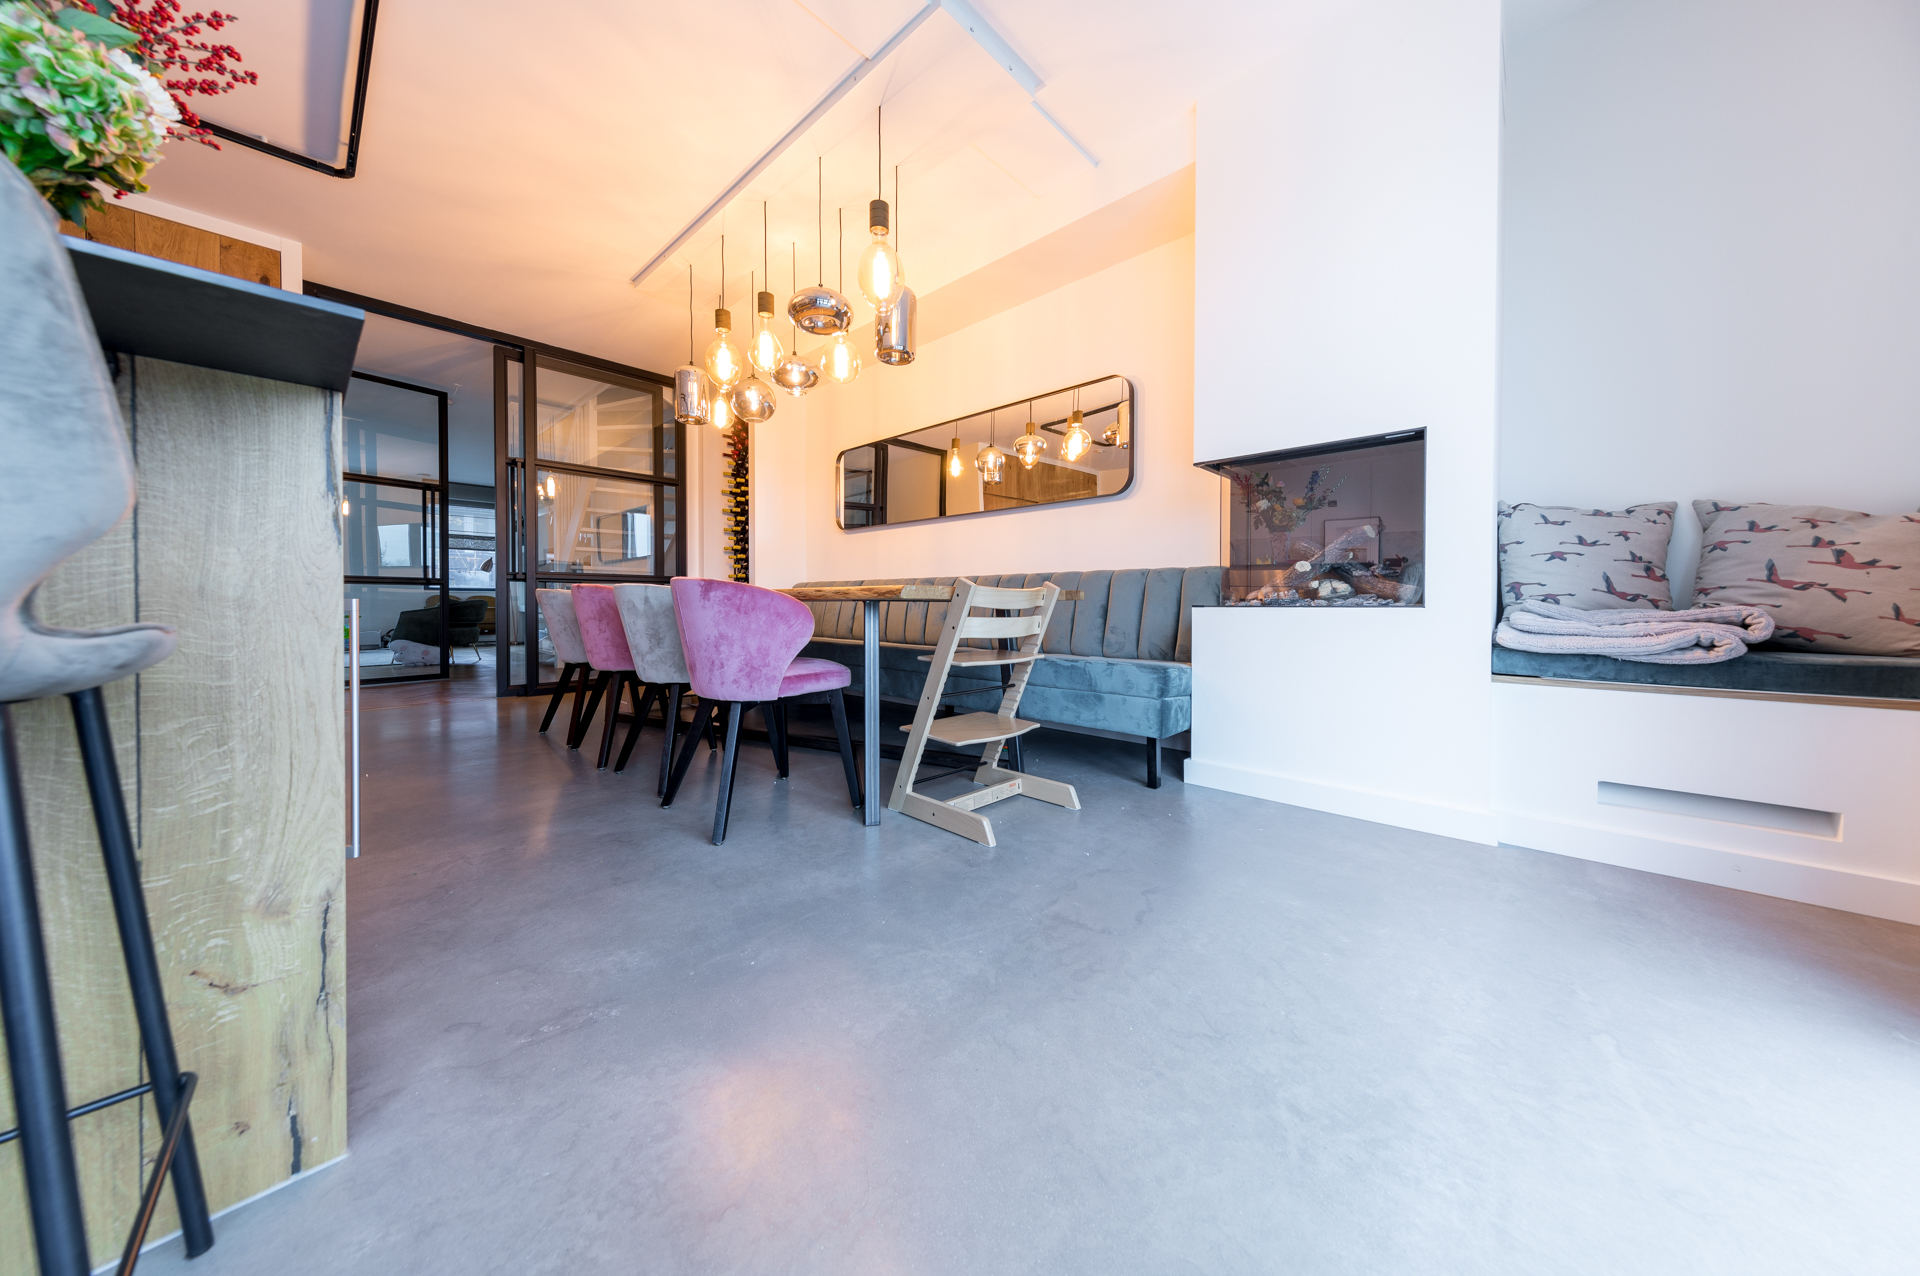  :  Concrete floors at home